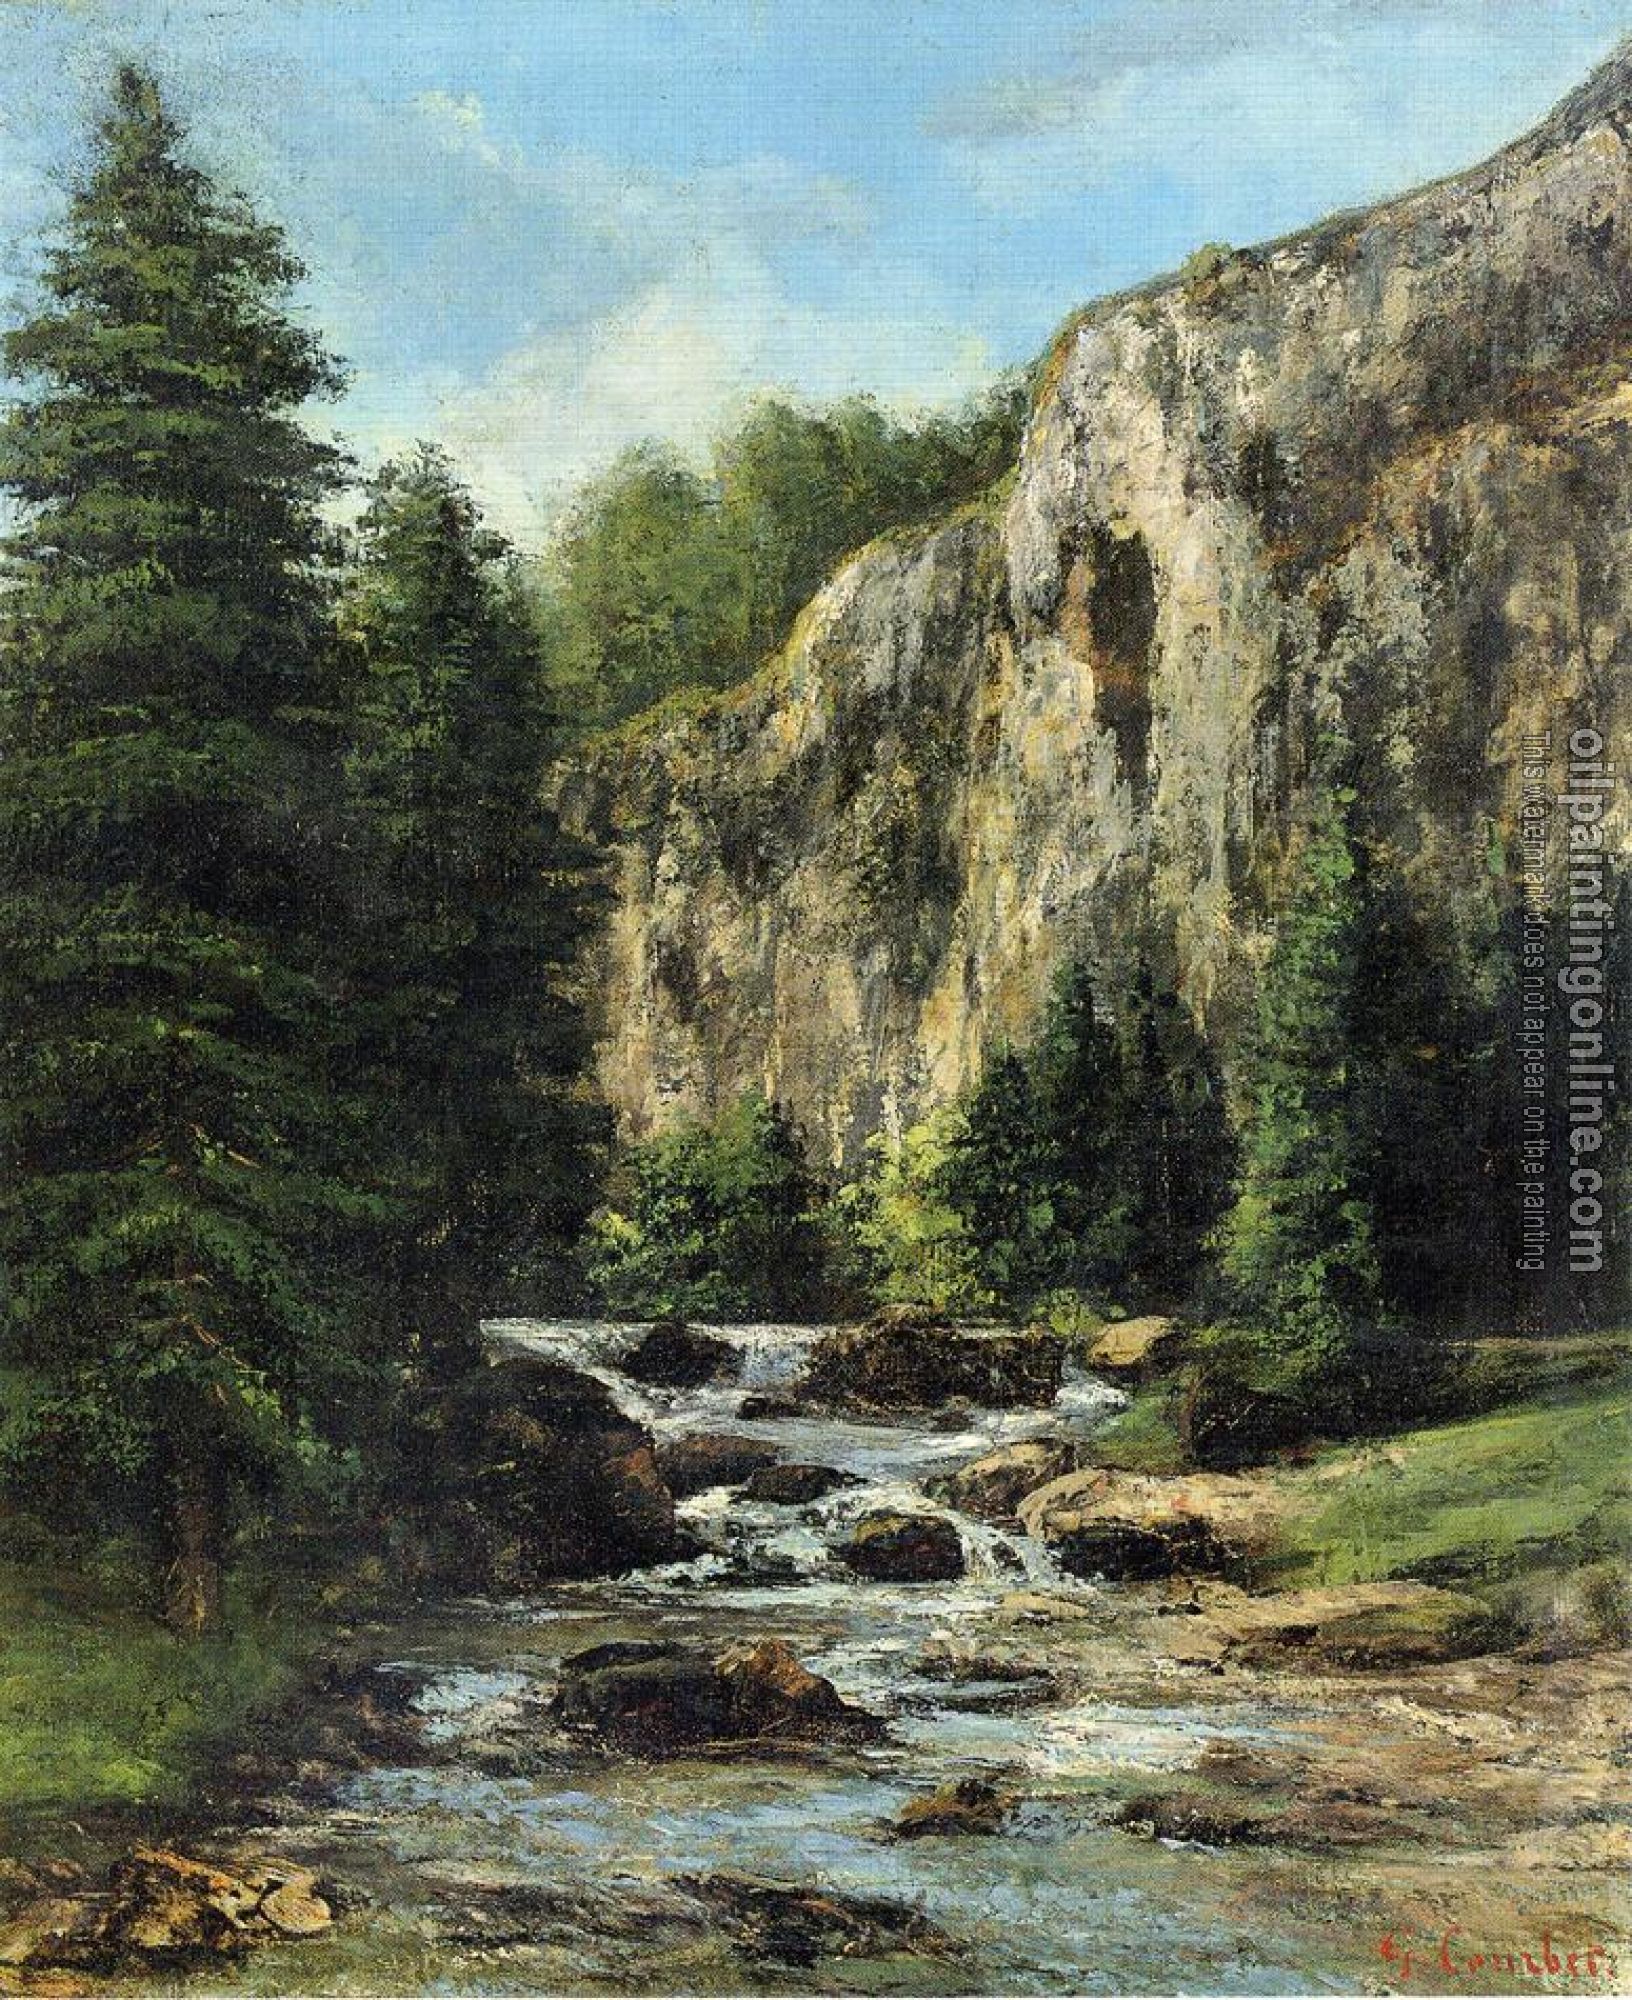 Courbet, Gustave - Study for 'Landscape with Waterfall'